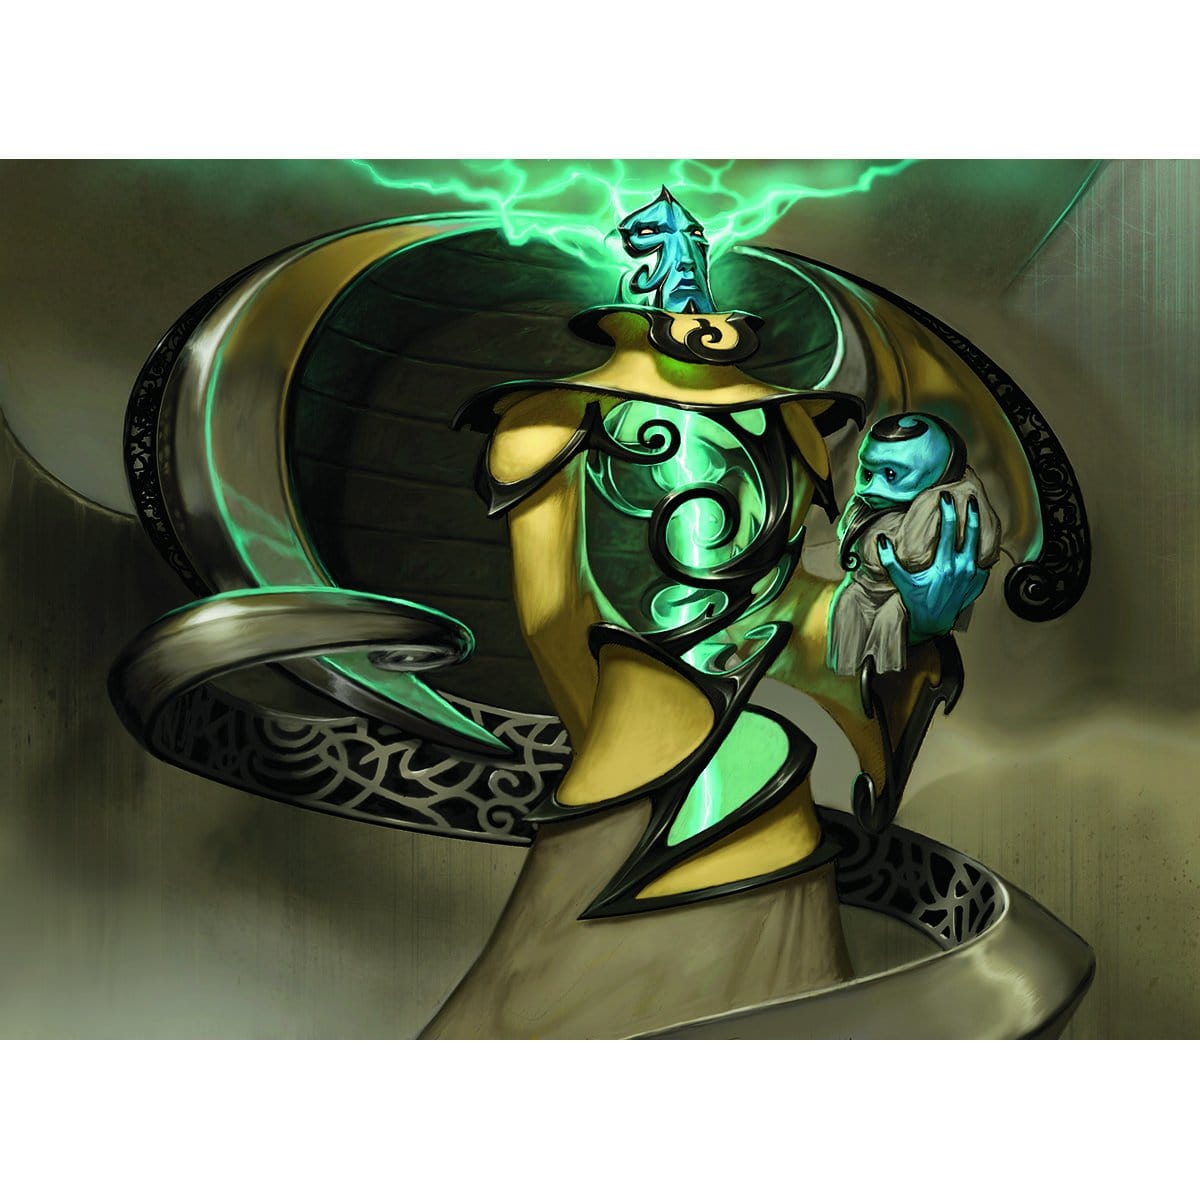 Master of Etherium Print - Print - Original Magic Art - Accessories for Magic the Gathering and other card games